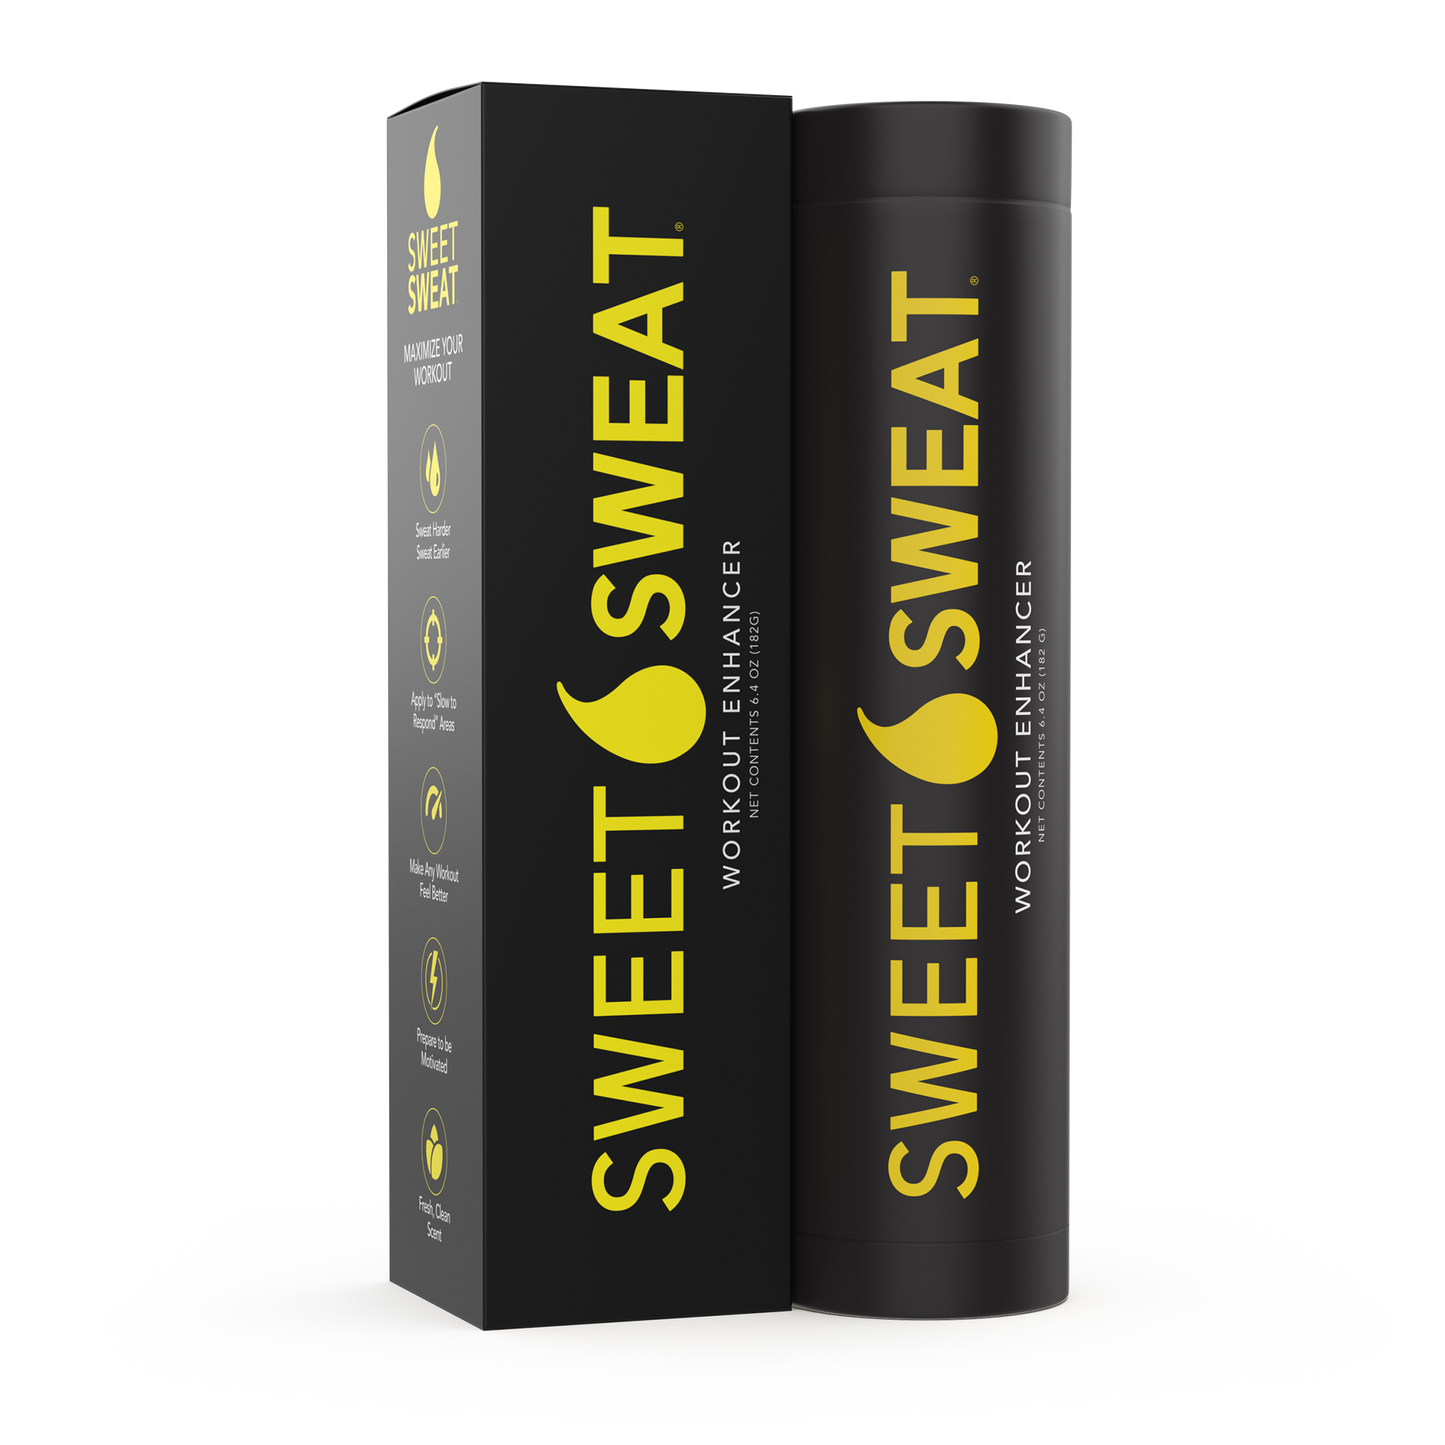 a box of Sweet Sweat® Stick 6.4 oz - Original with a yellow label on it.